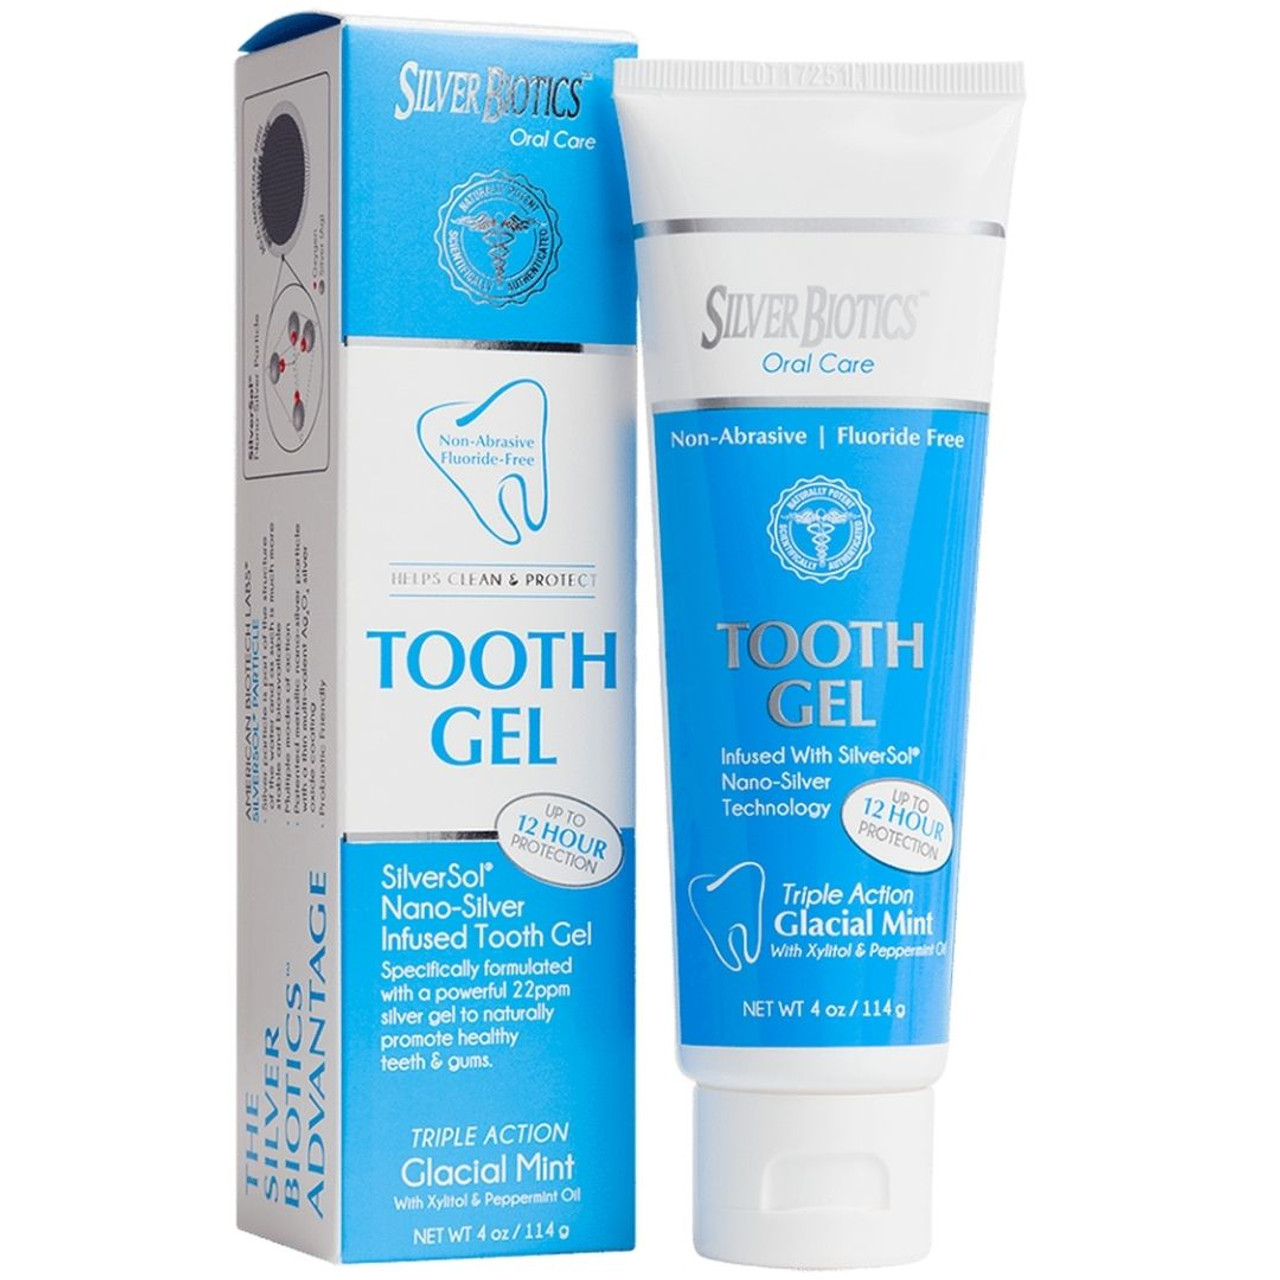 https://cdn11.bigcommerce.com/s-5092c/images/stencil/1280x1280/products/3451/7440/Silver_Biotics_Tooth_Gel_Nano-Silver_Infused_-_22_ppm_-_Glacial_Mint_-_4_oz__73644.1602511887.jpg?c=2